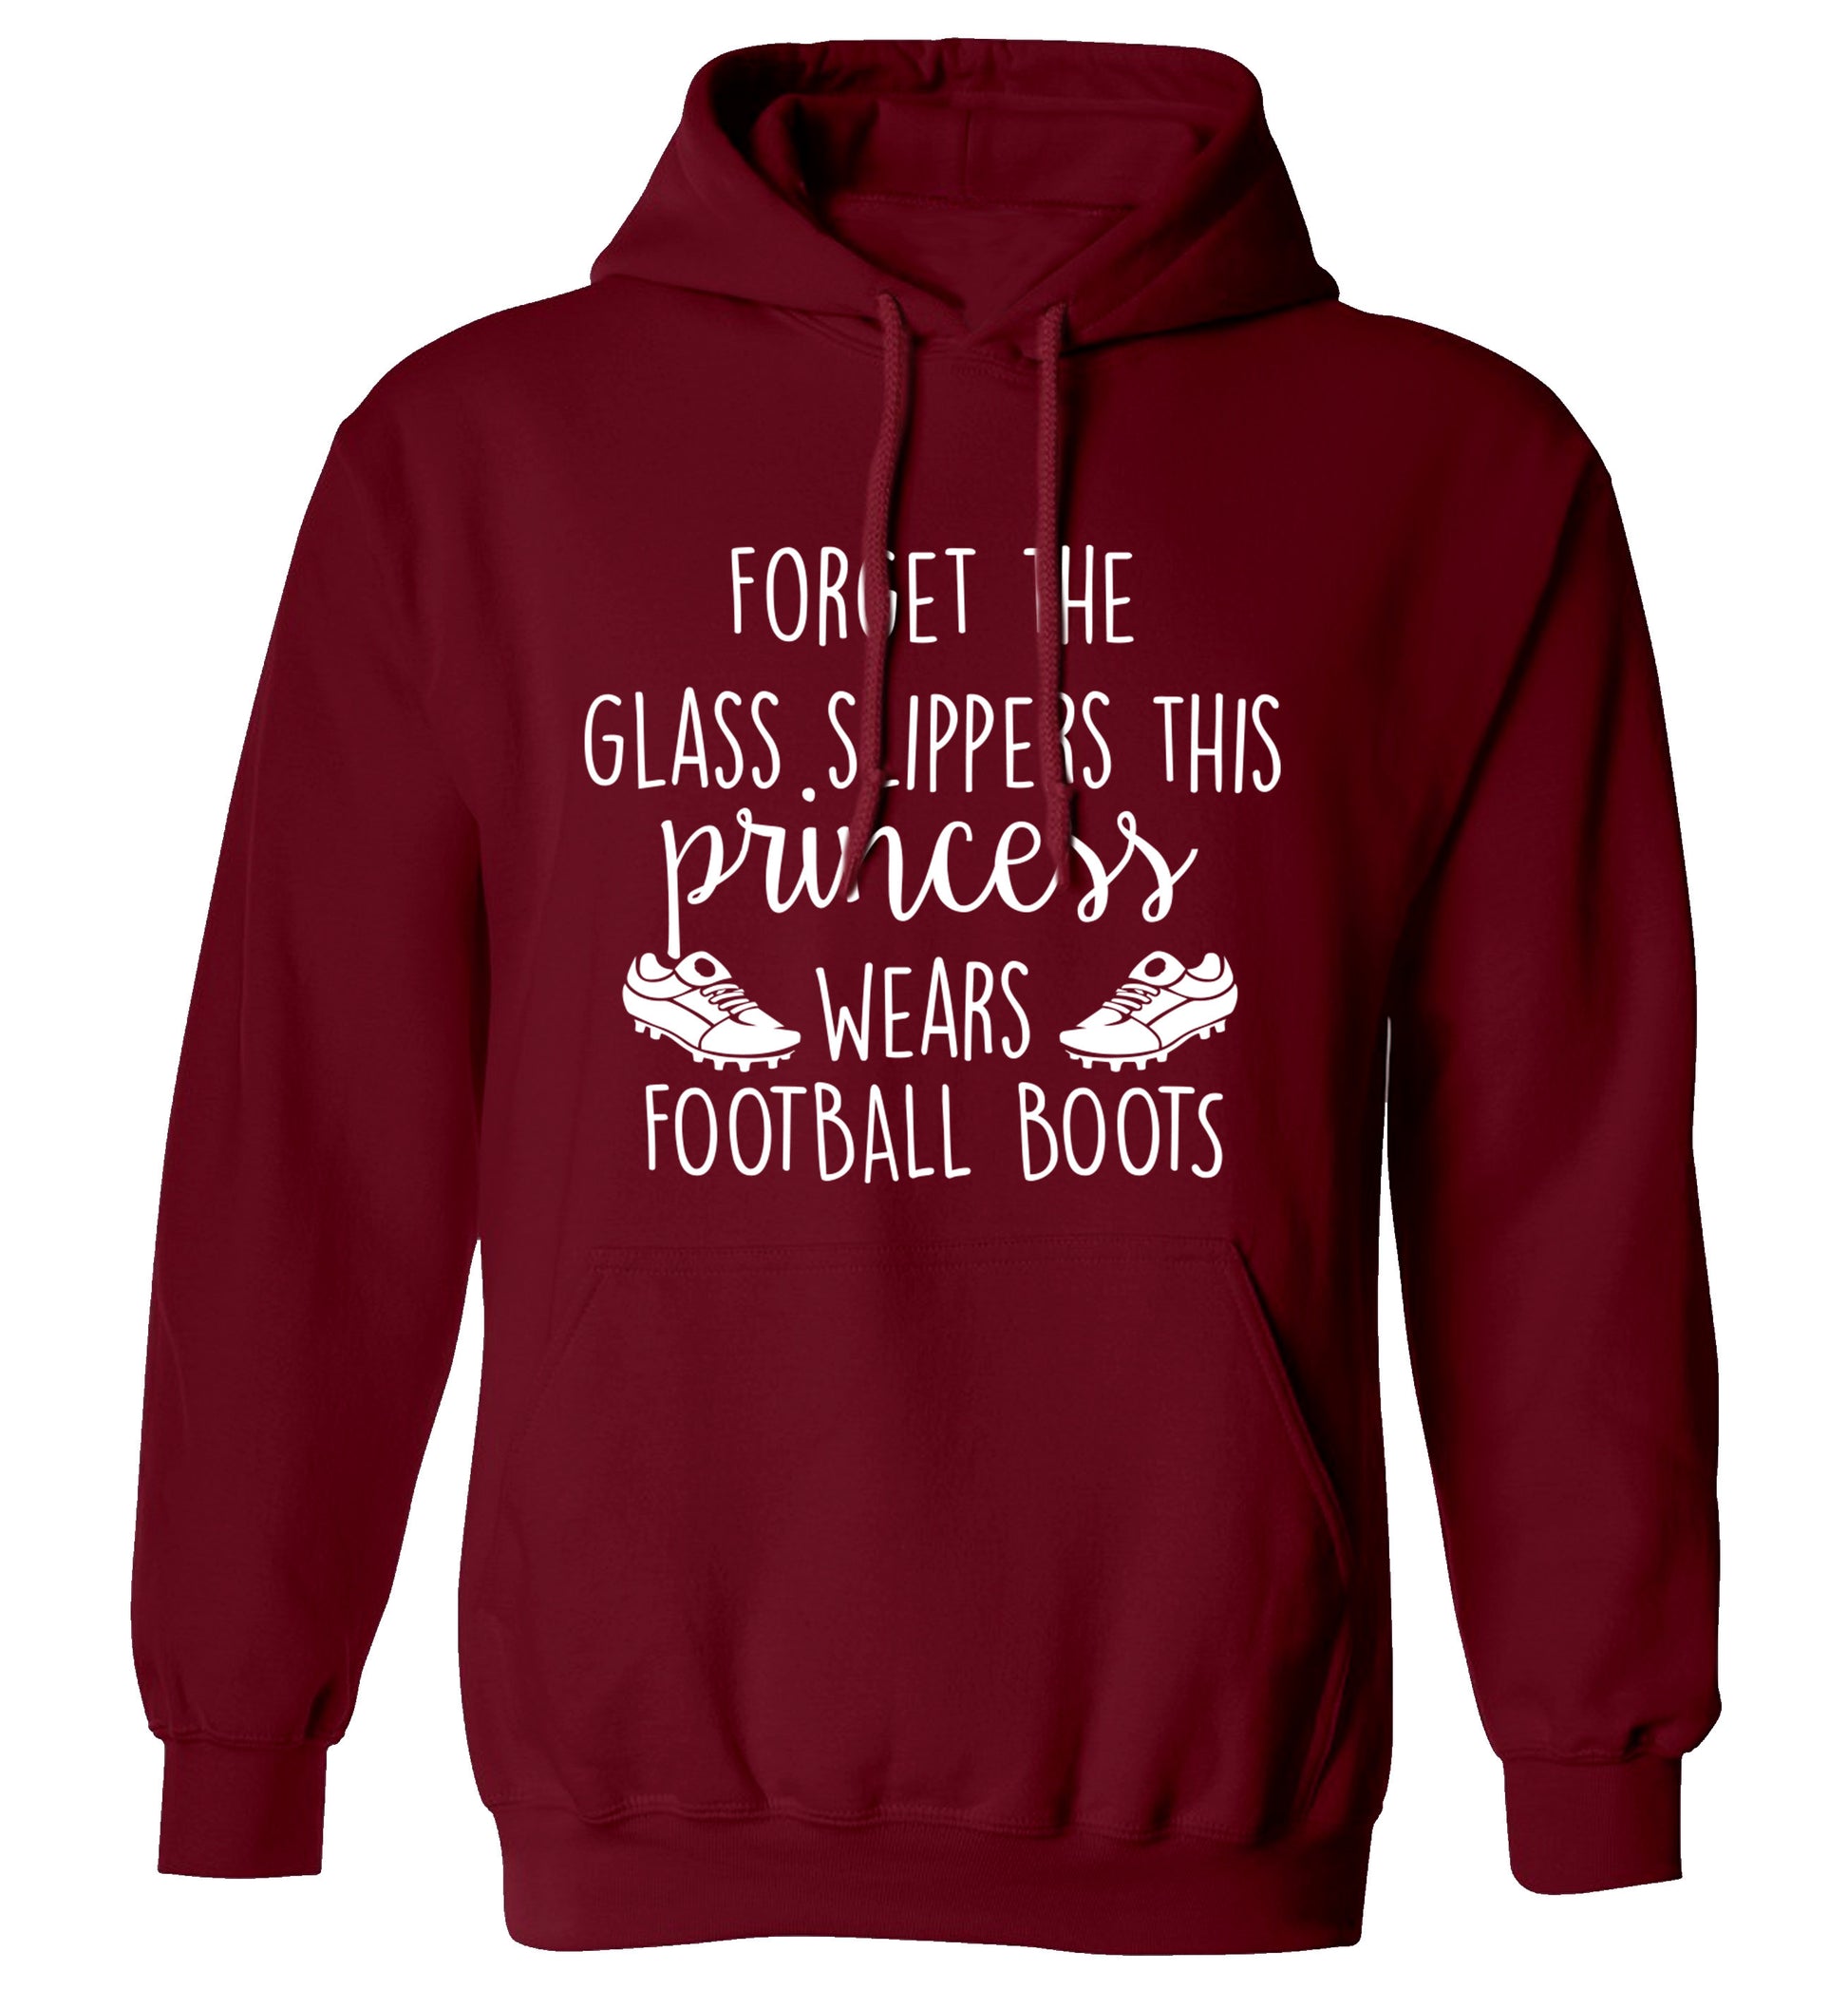 Forget the glass slippers this princess wears football boots adults unisex maroon hoodie 2XL